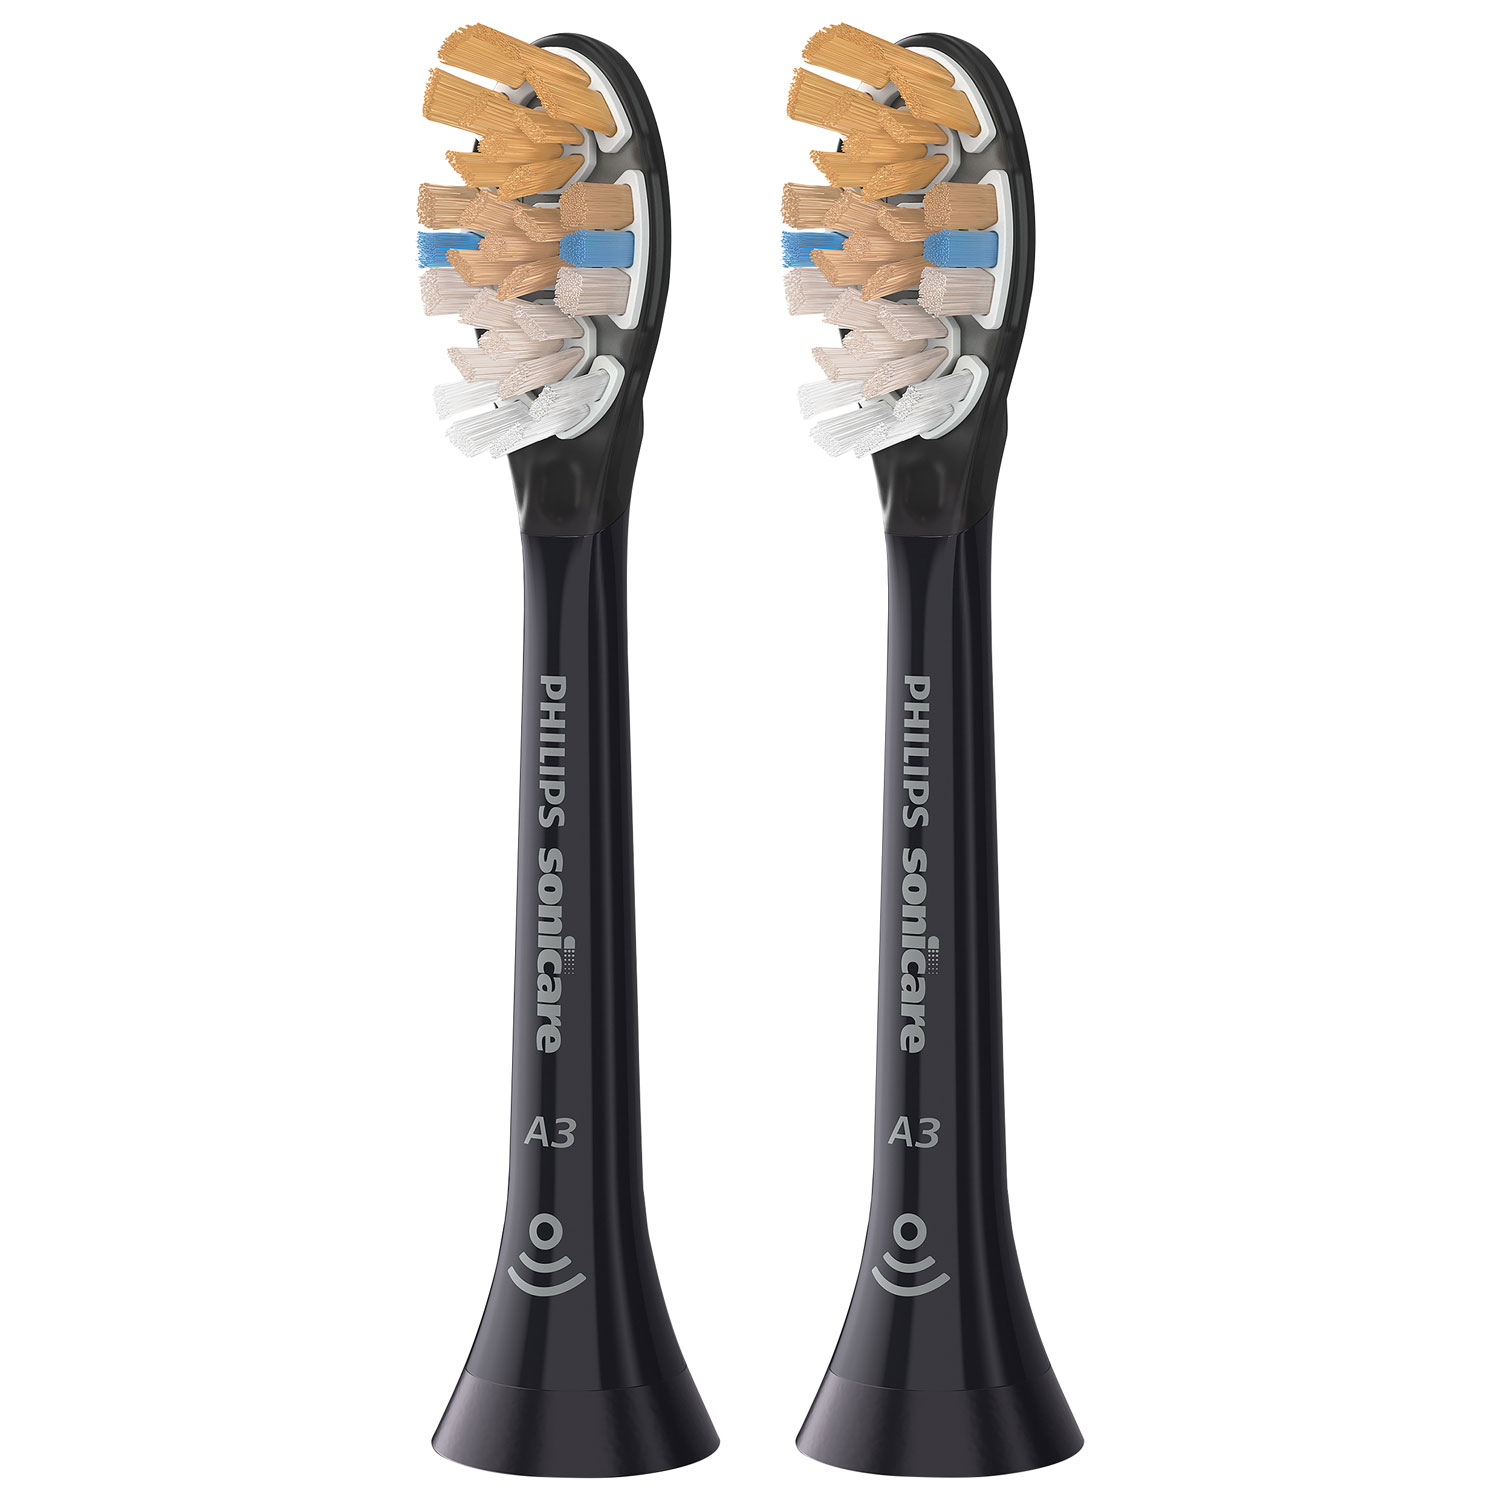 Philips Sonicare Premium All-in-One Replacement Toothbrush Heads - 2 Pack - Black